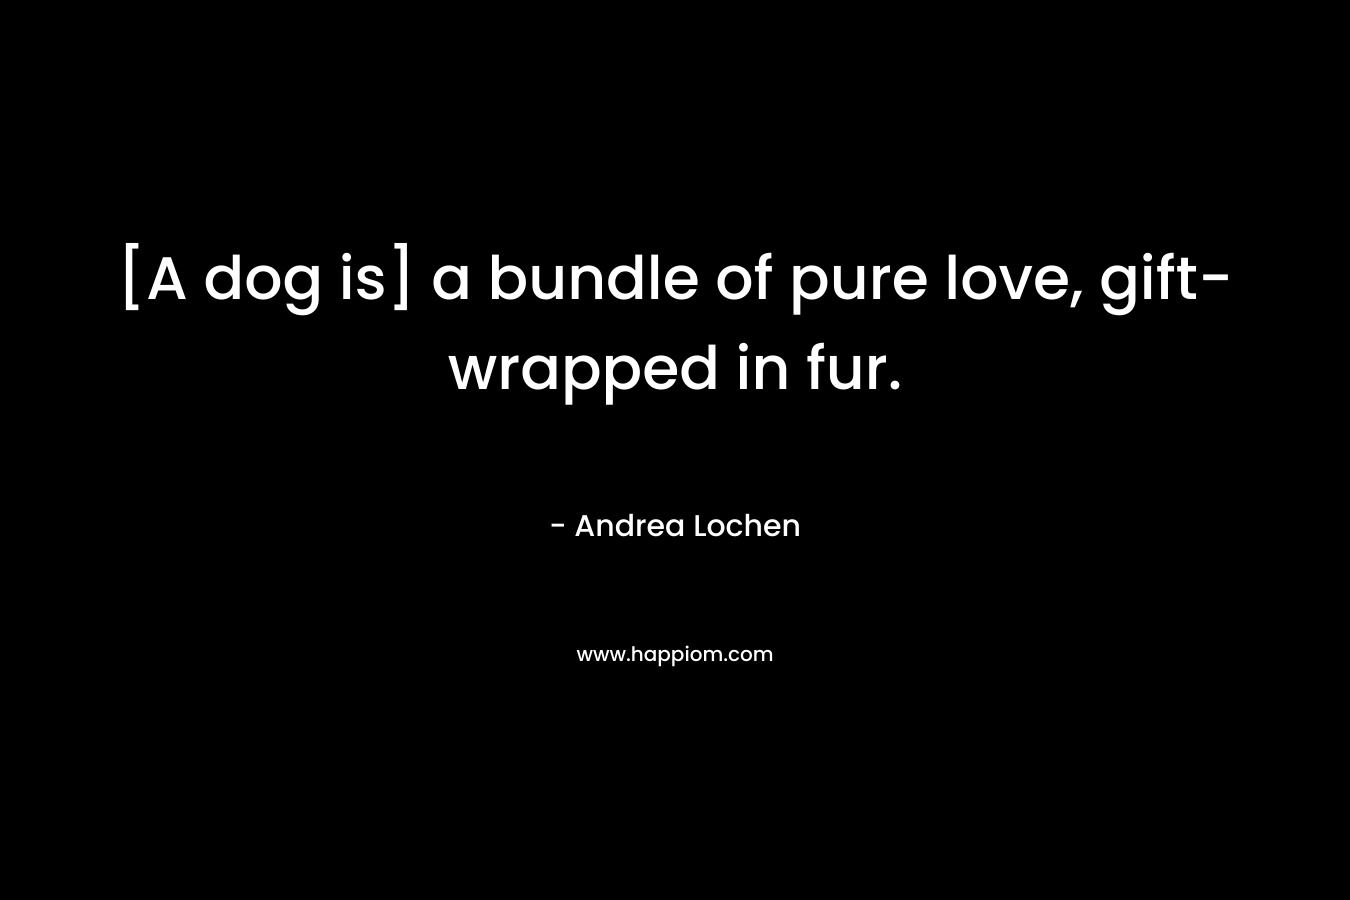 [A dog is] a bundle of pure love, gift-wrapped in fur.